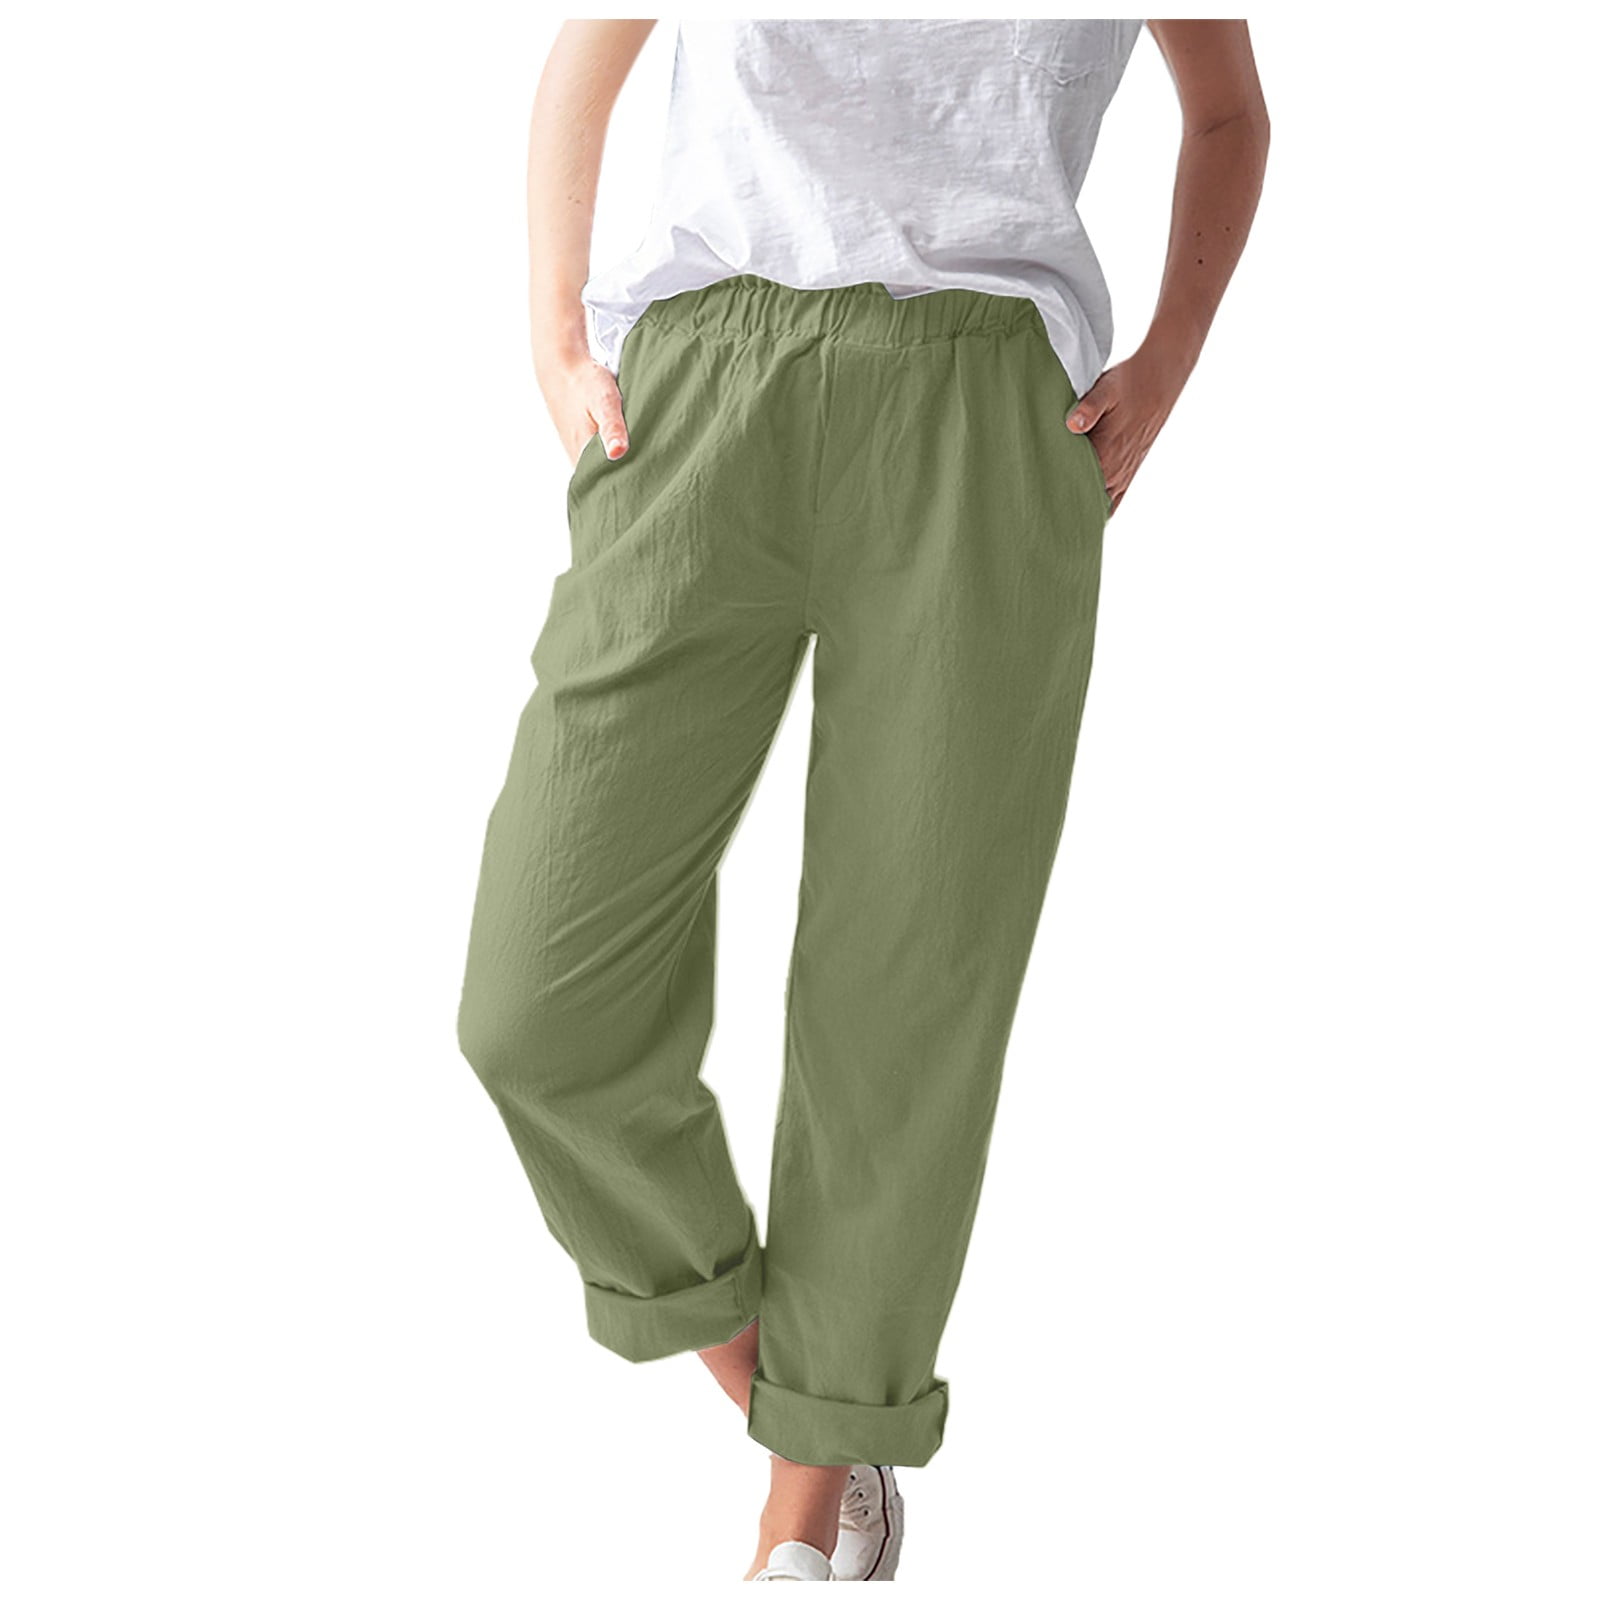 Ketyyh-chn99 Dress Pants Women Women's Cotton Pull-on Pant with Elastic  Waist 